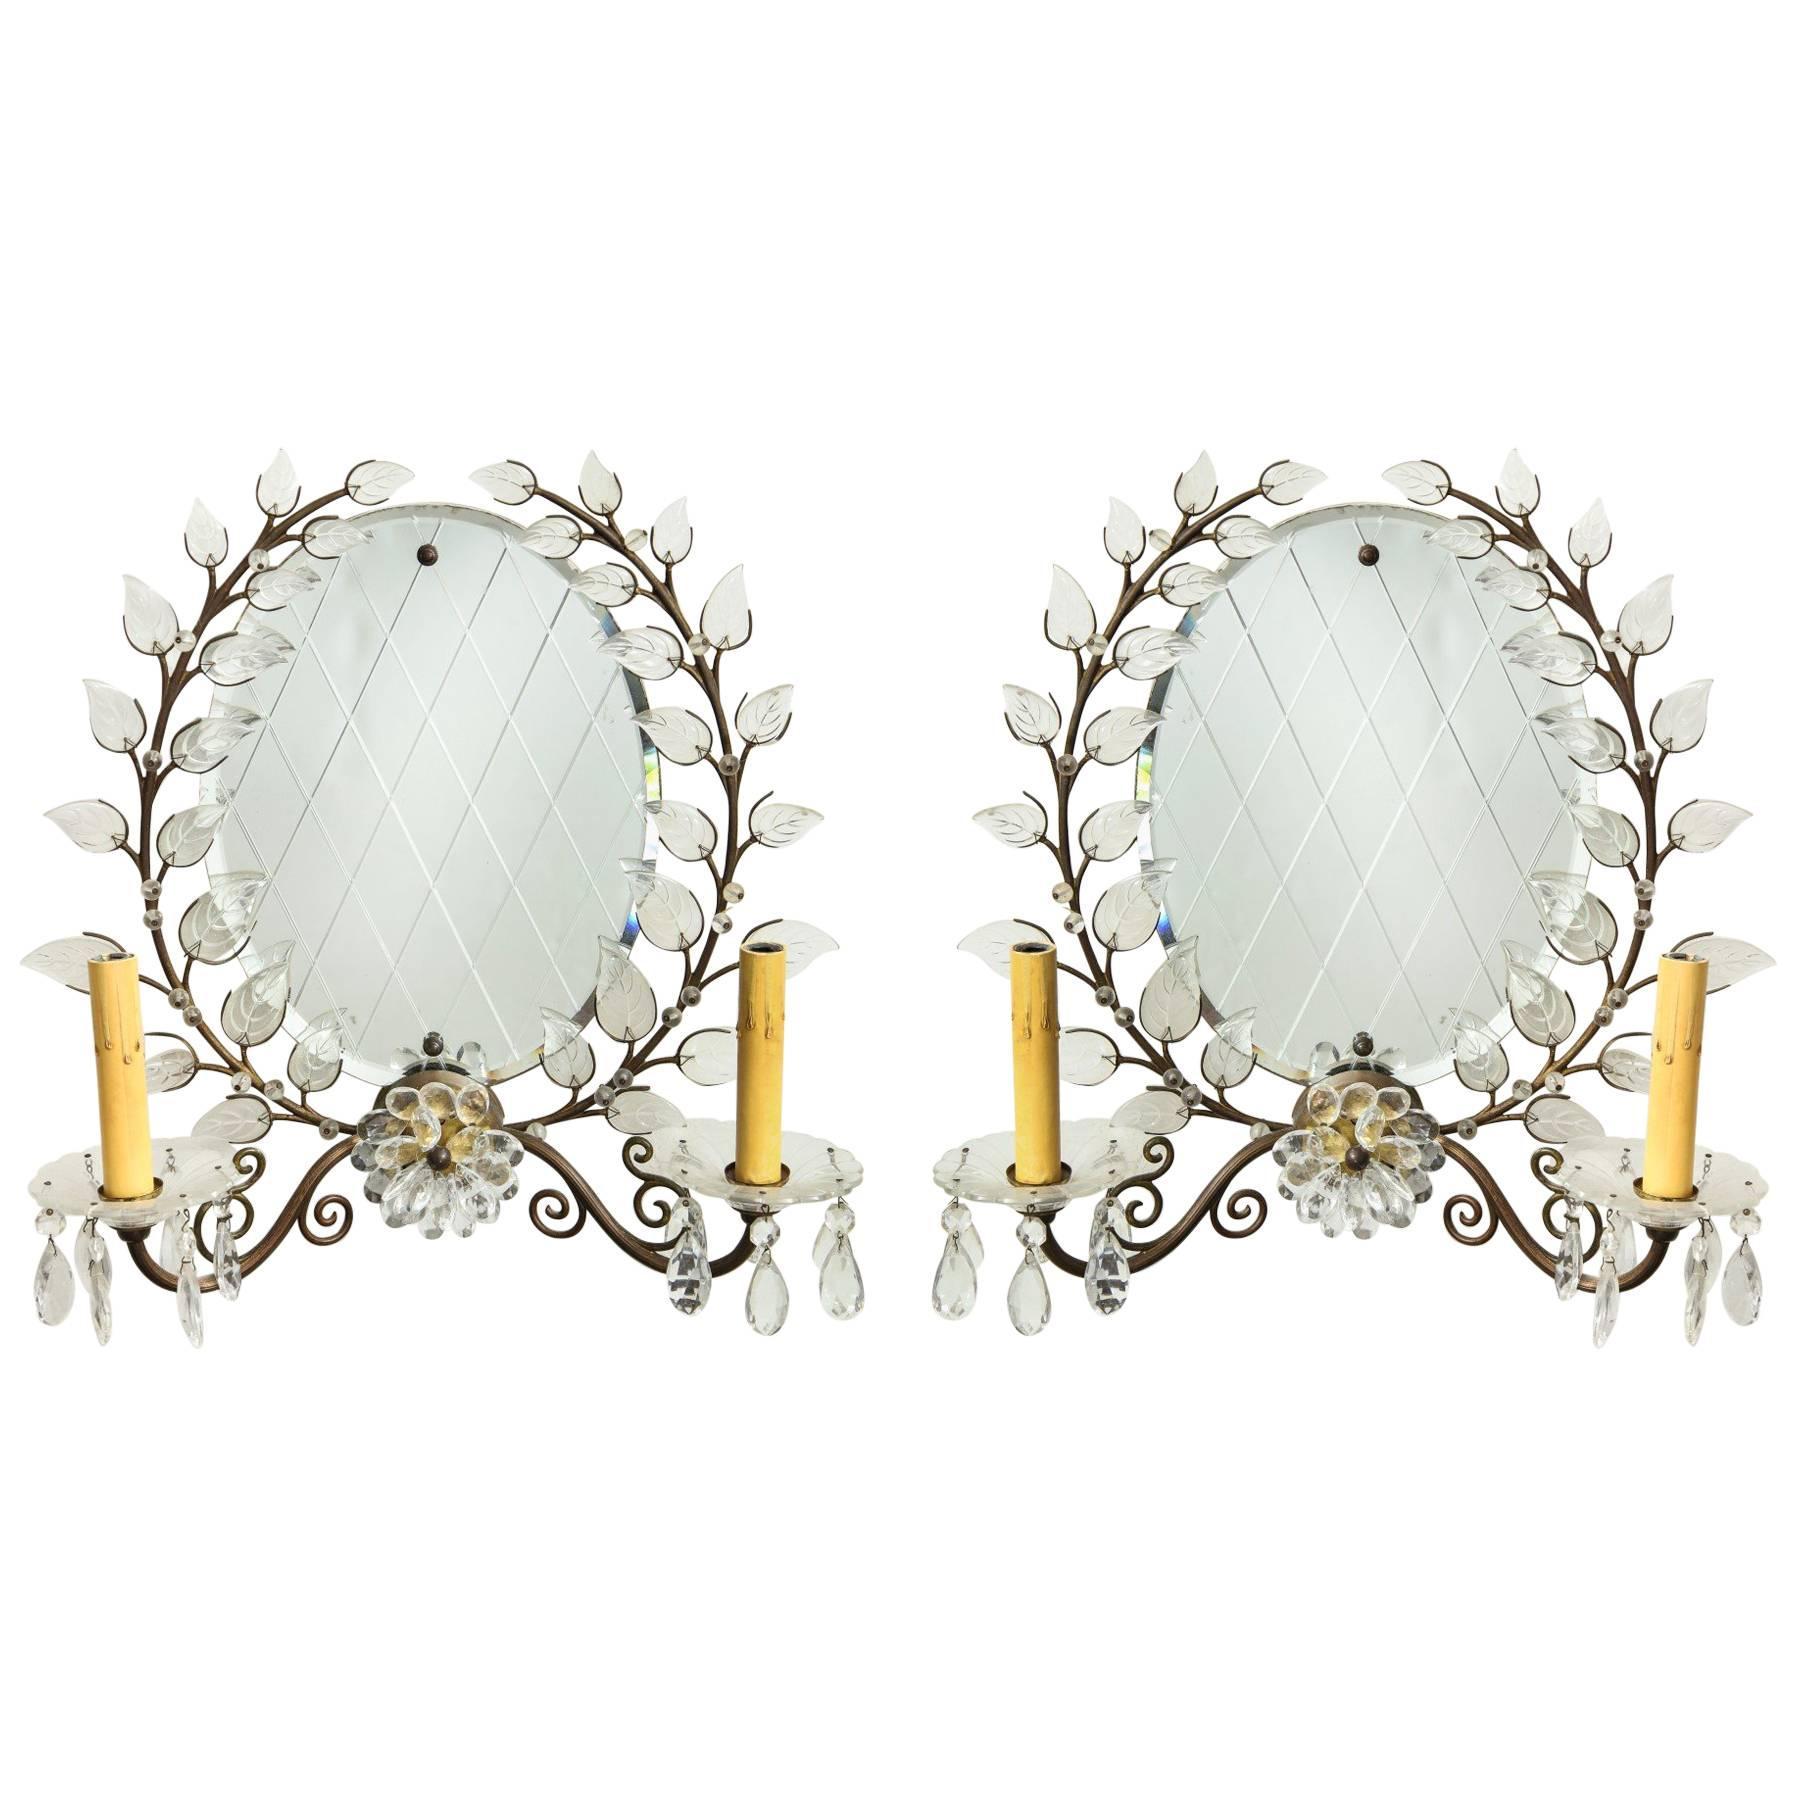 French 1950s Two-Light Mirrored Sconces